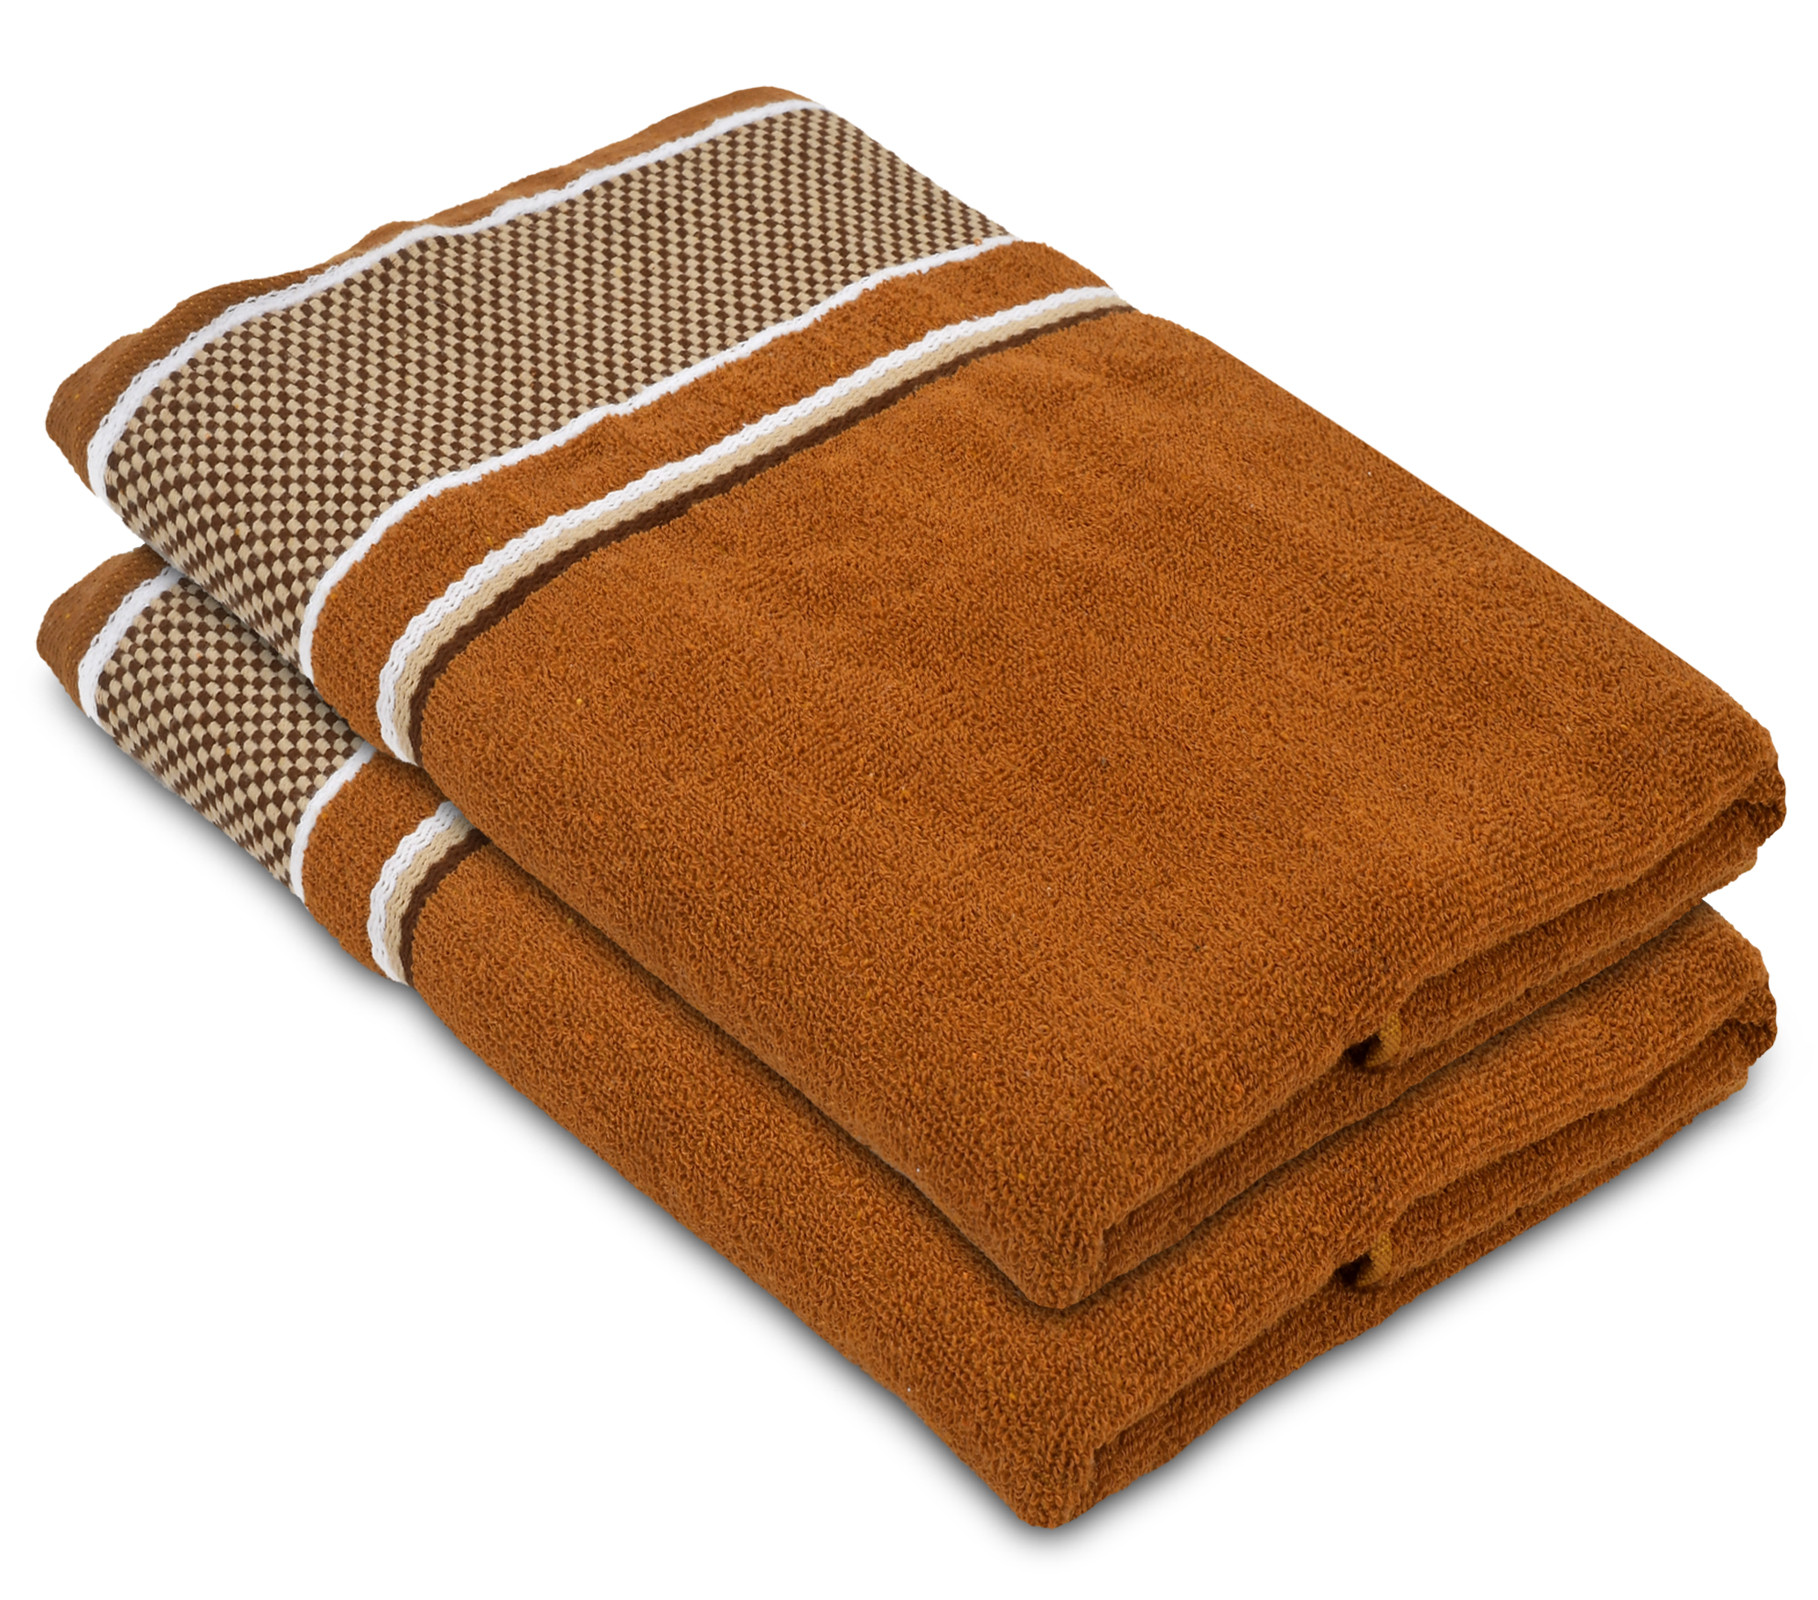 Kuber Industries Luxurious, Soft Cotton Bath Towel With Check Border, 30